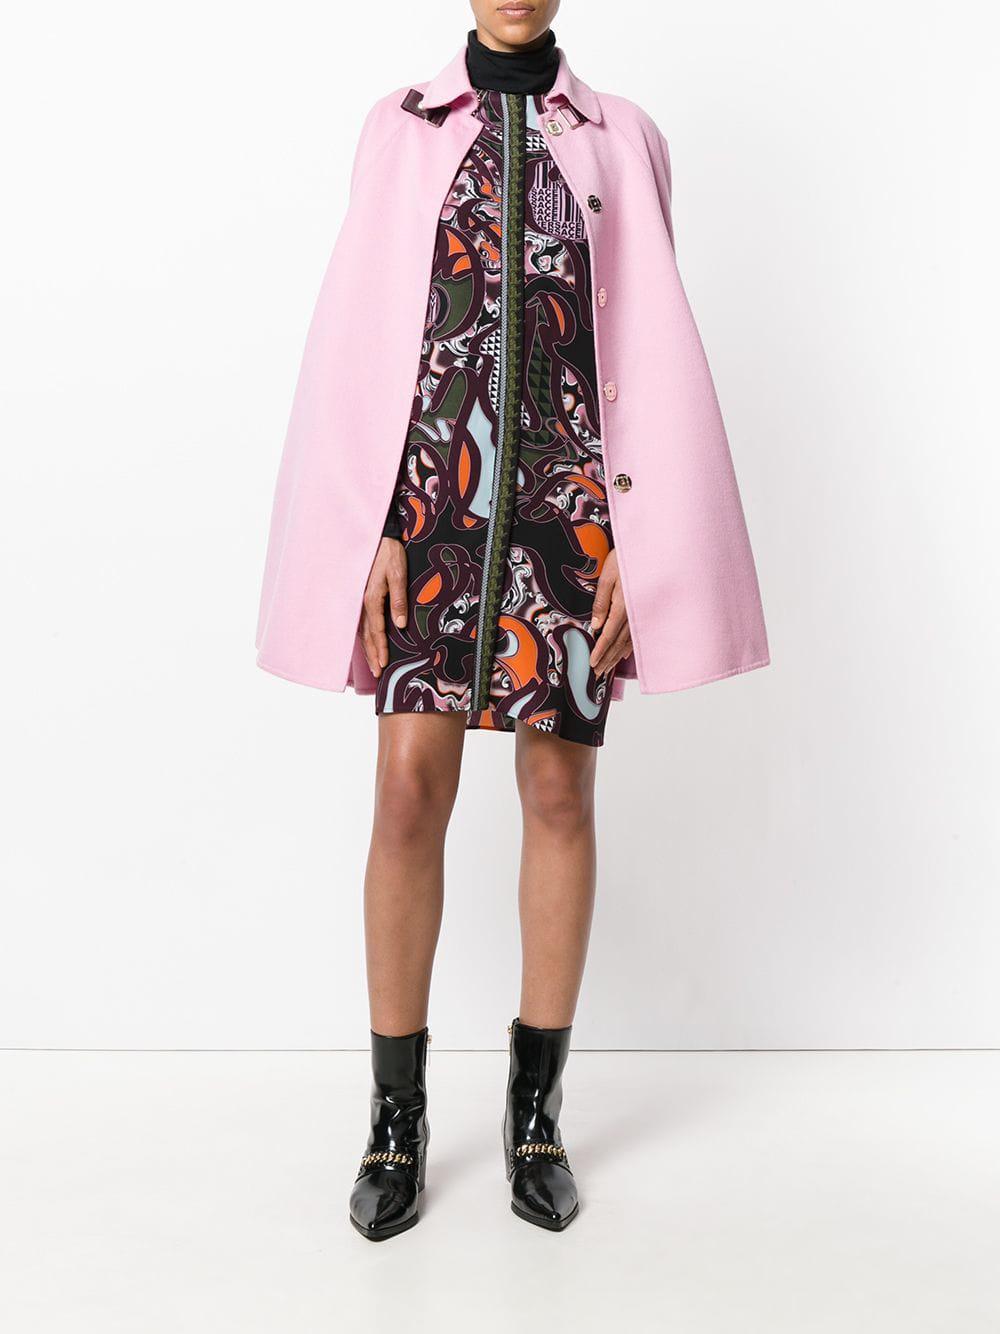 Versace Cashmere Cape Coat in Pink - Lyst